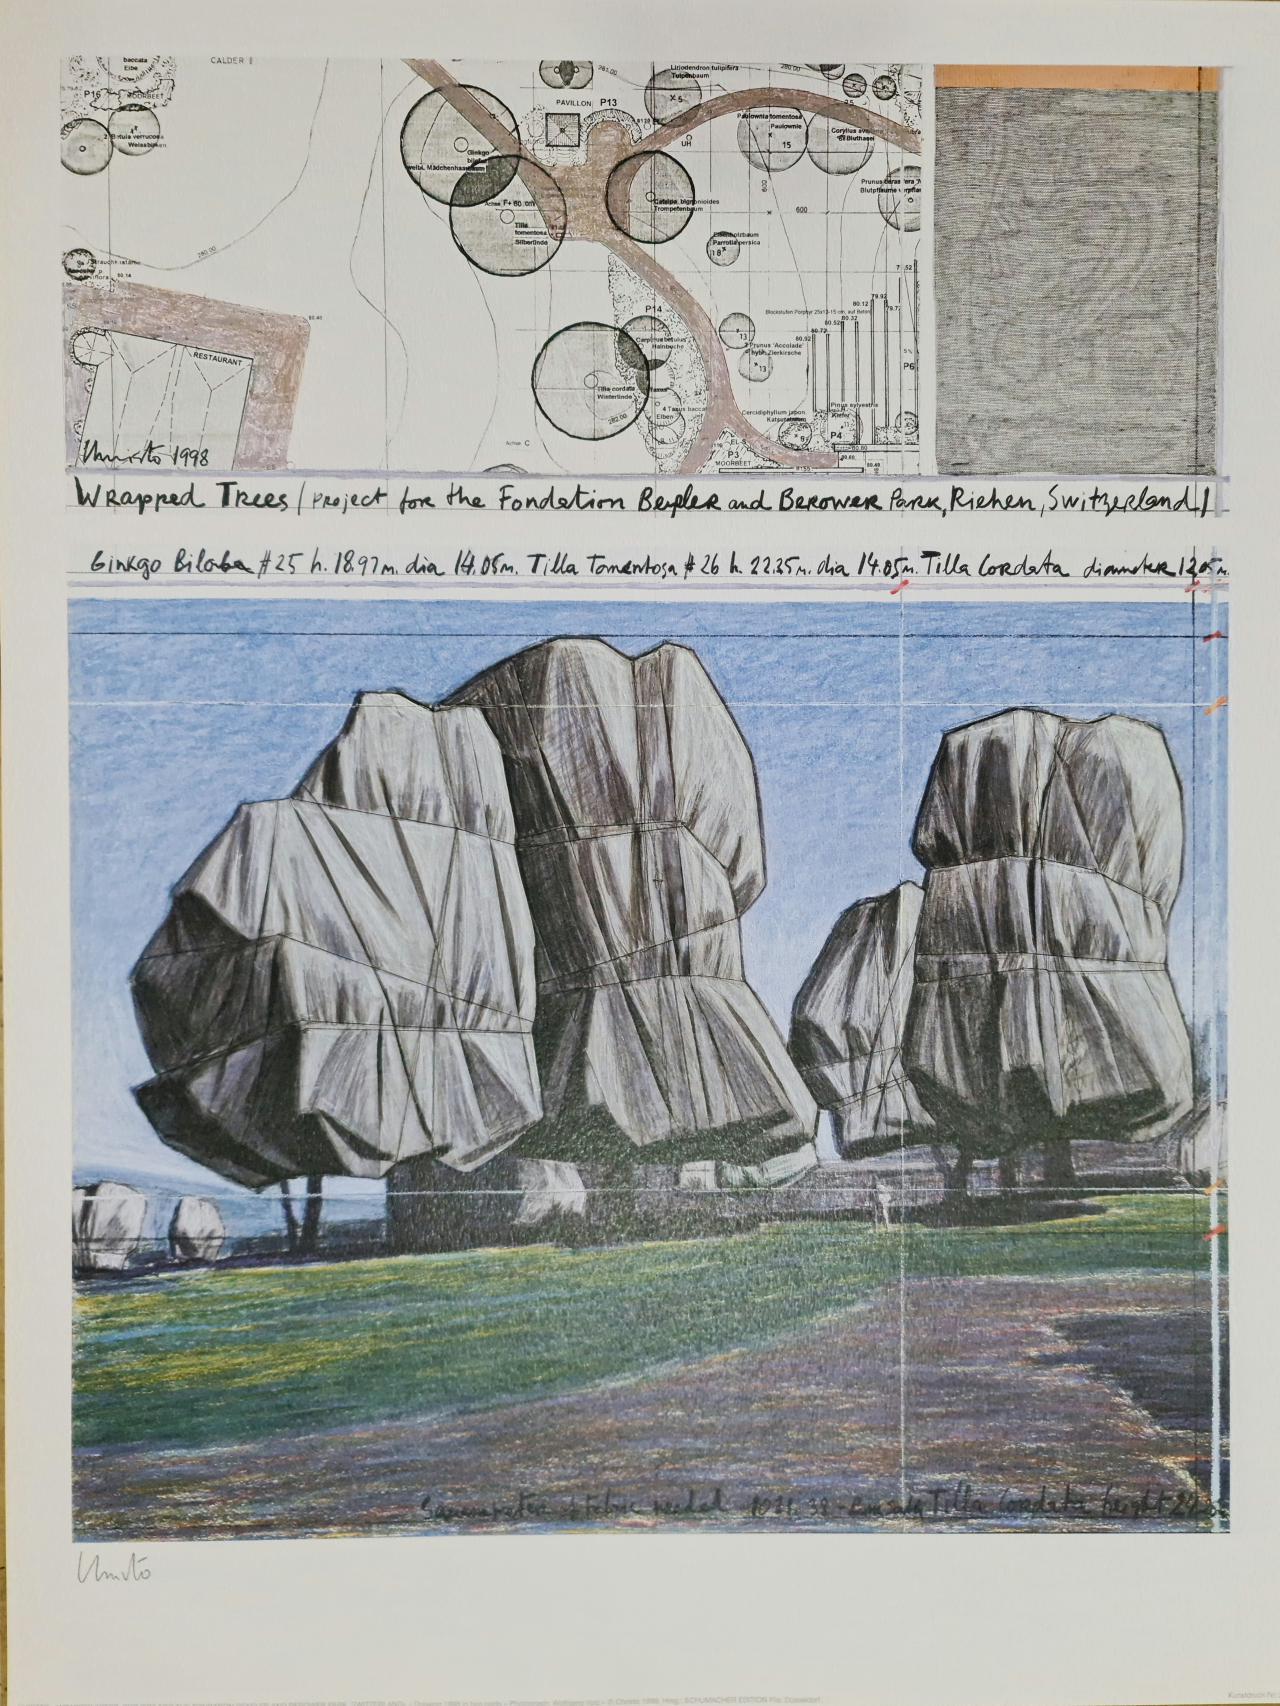 Christo, Wrapped Trees Vertical, lithographie, 1998